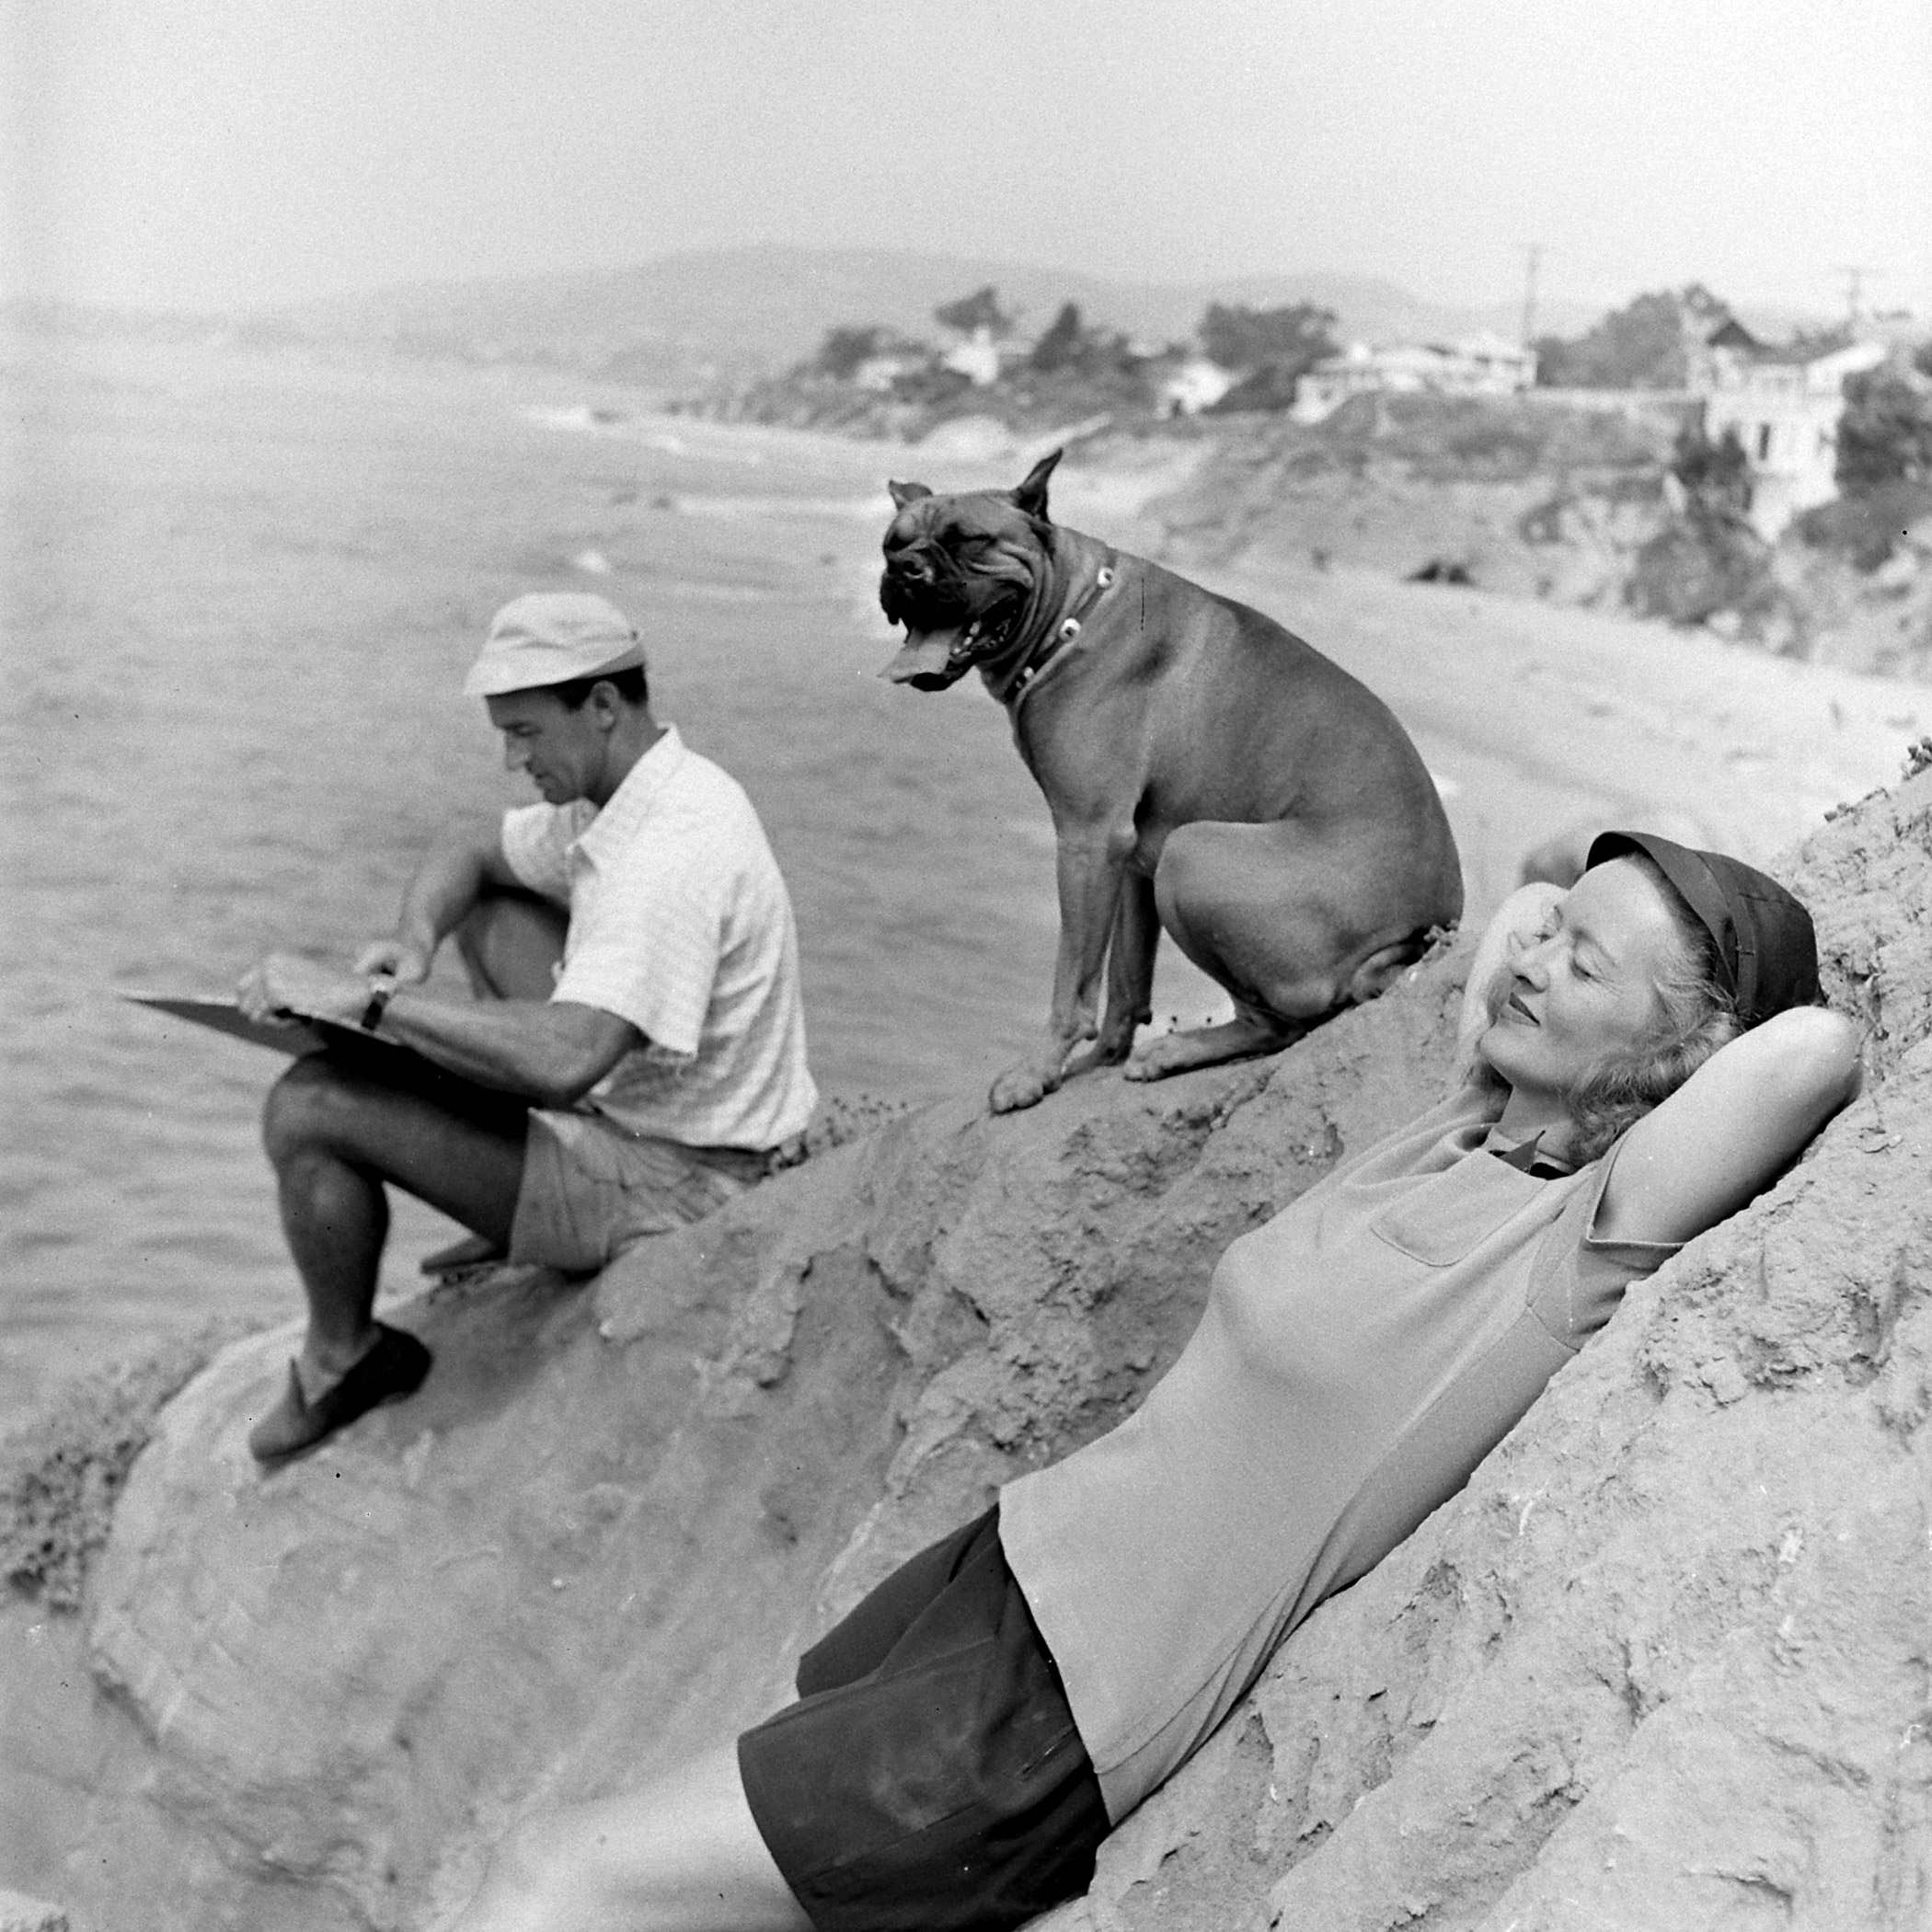 Bette Davis and her third husband, William Grant Sherry, at the beach in California, 1947.